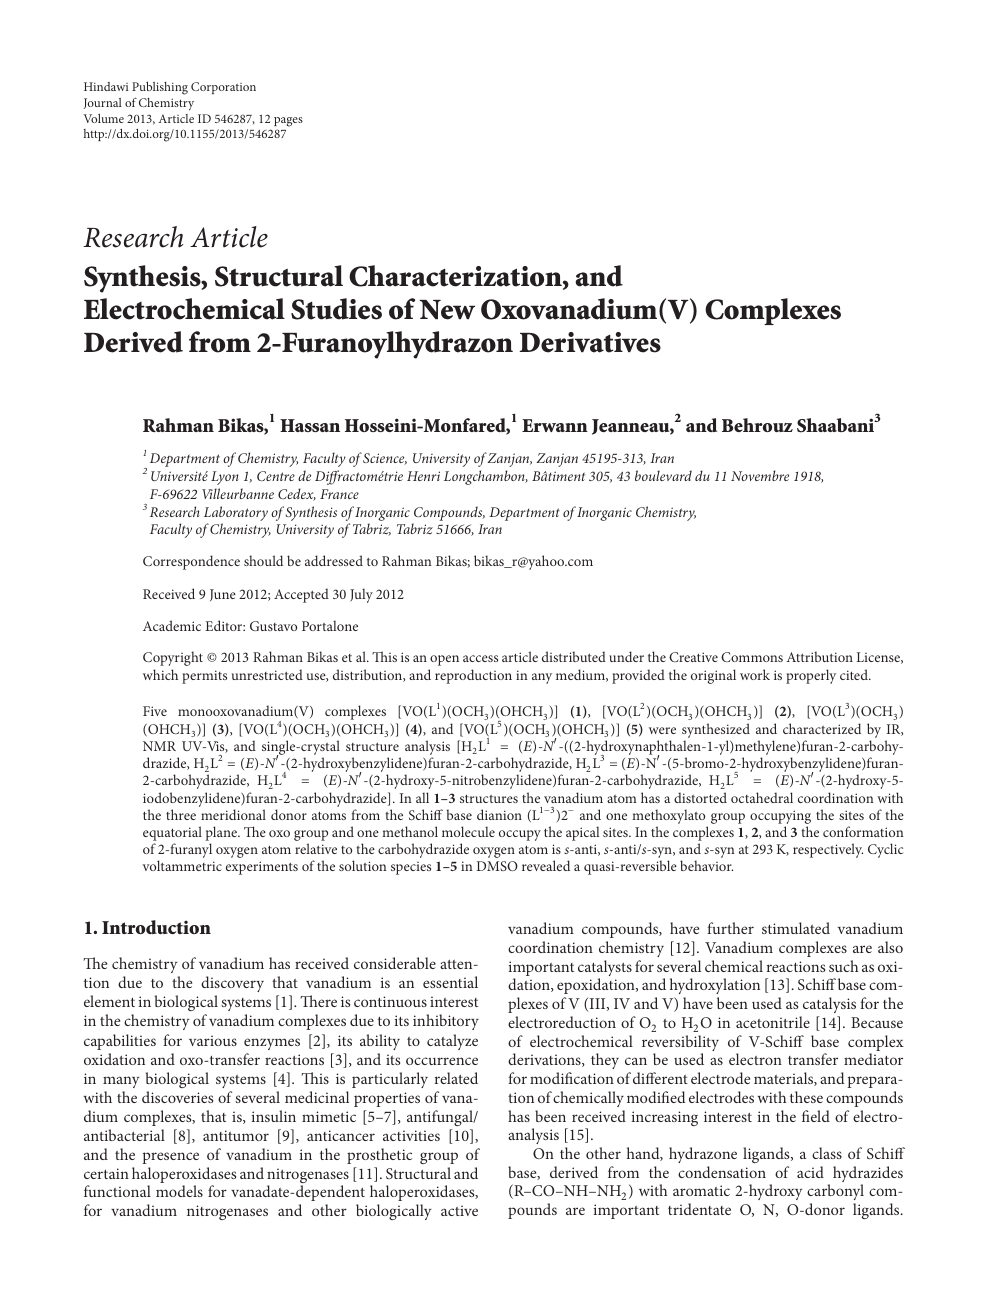 Synthesis Structural Characterization And Electrochemical Studies Of New Oxovanadium V Complexes Derived From 2 Furanoylhydrazon Derivatives Topic Of Research Paper In Chemical Sciences Download Scholarly Article Pdf And Read For Free On Cyberleninka